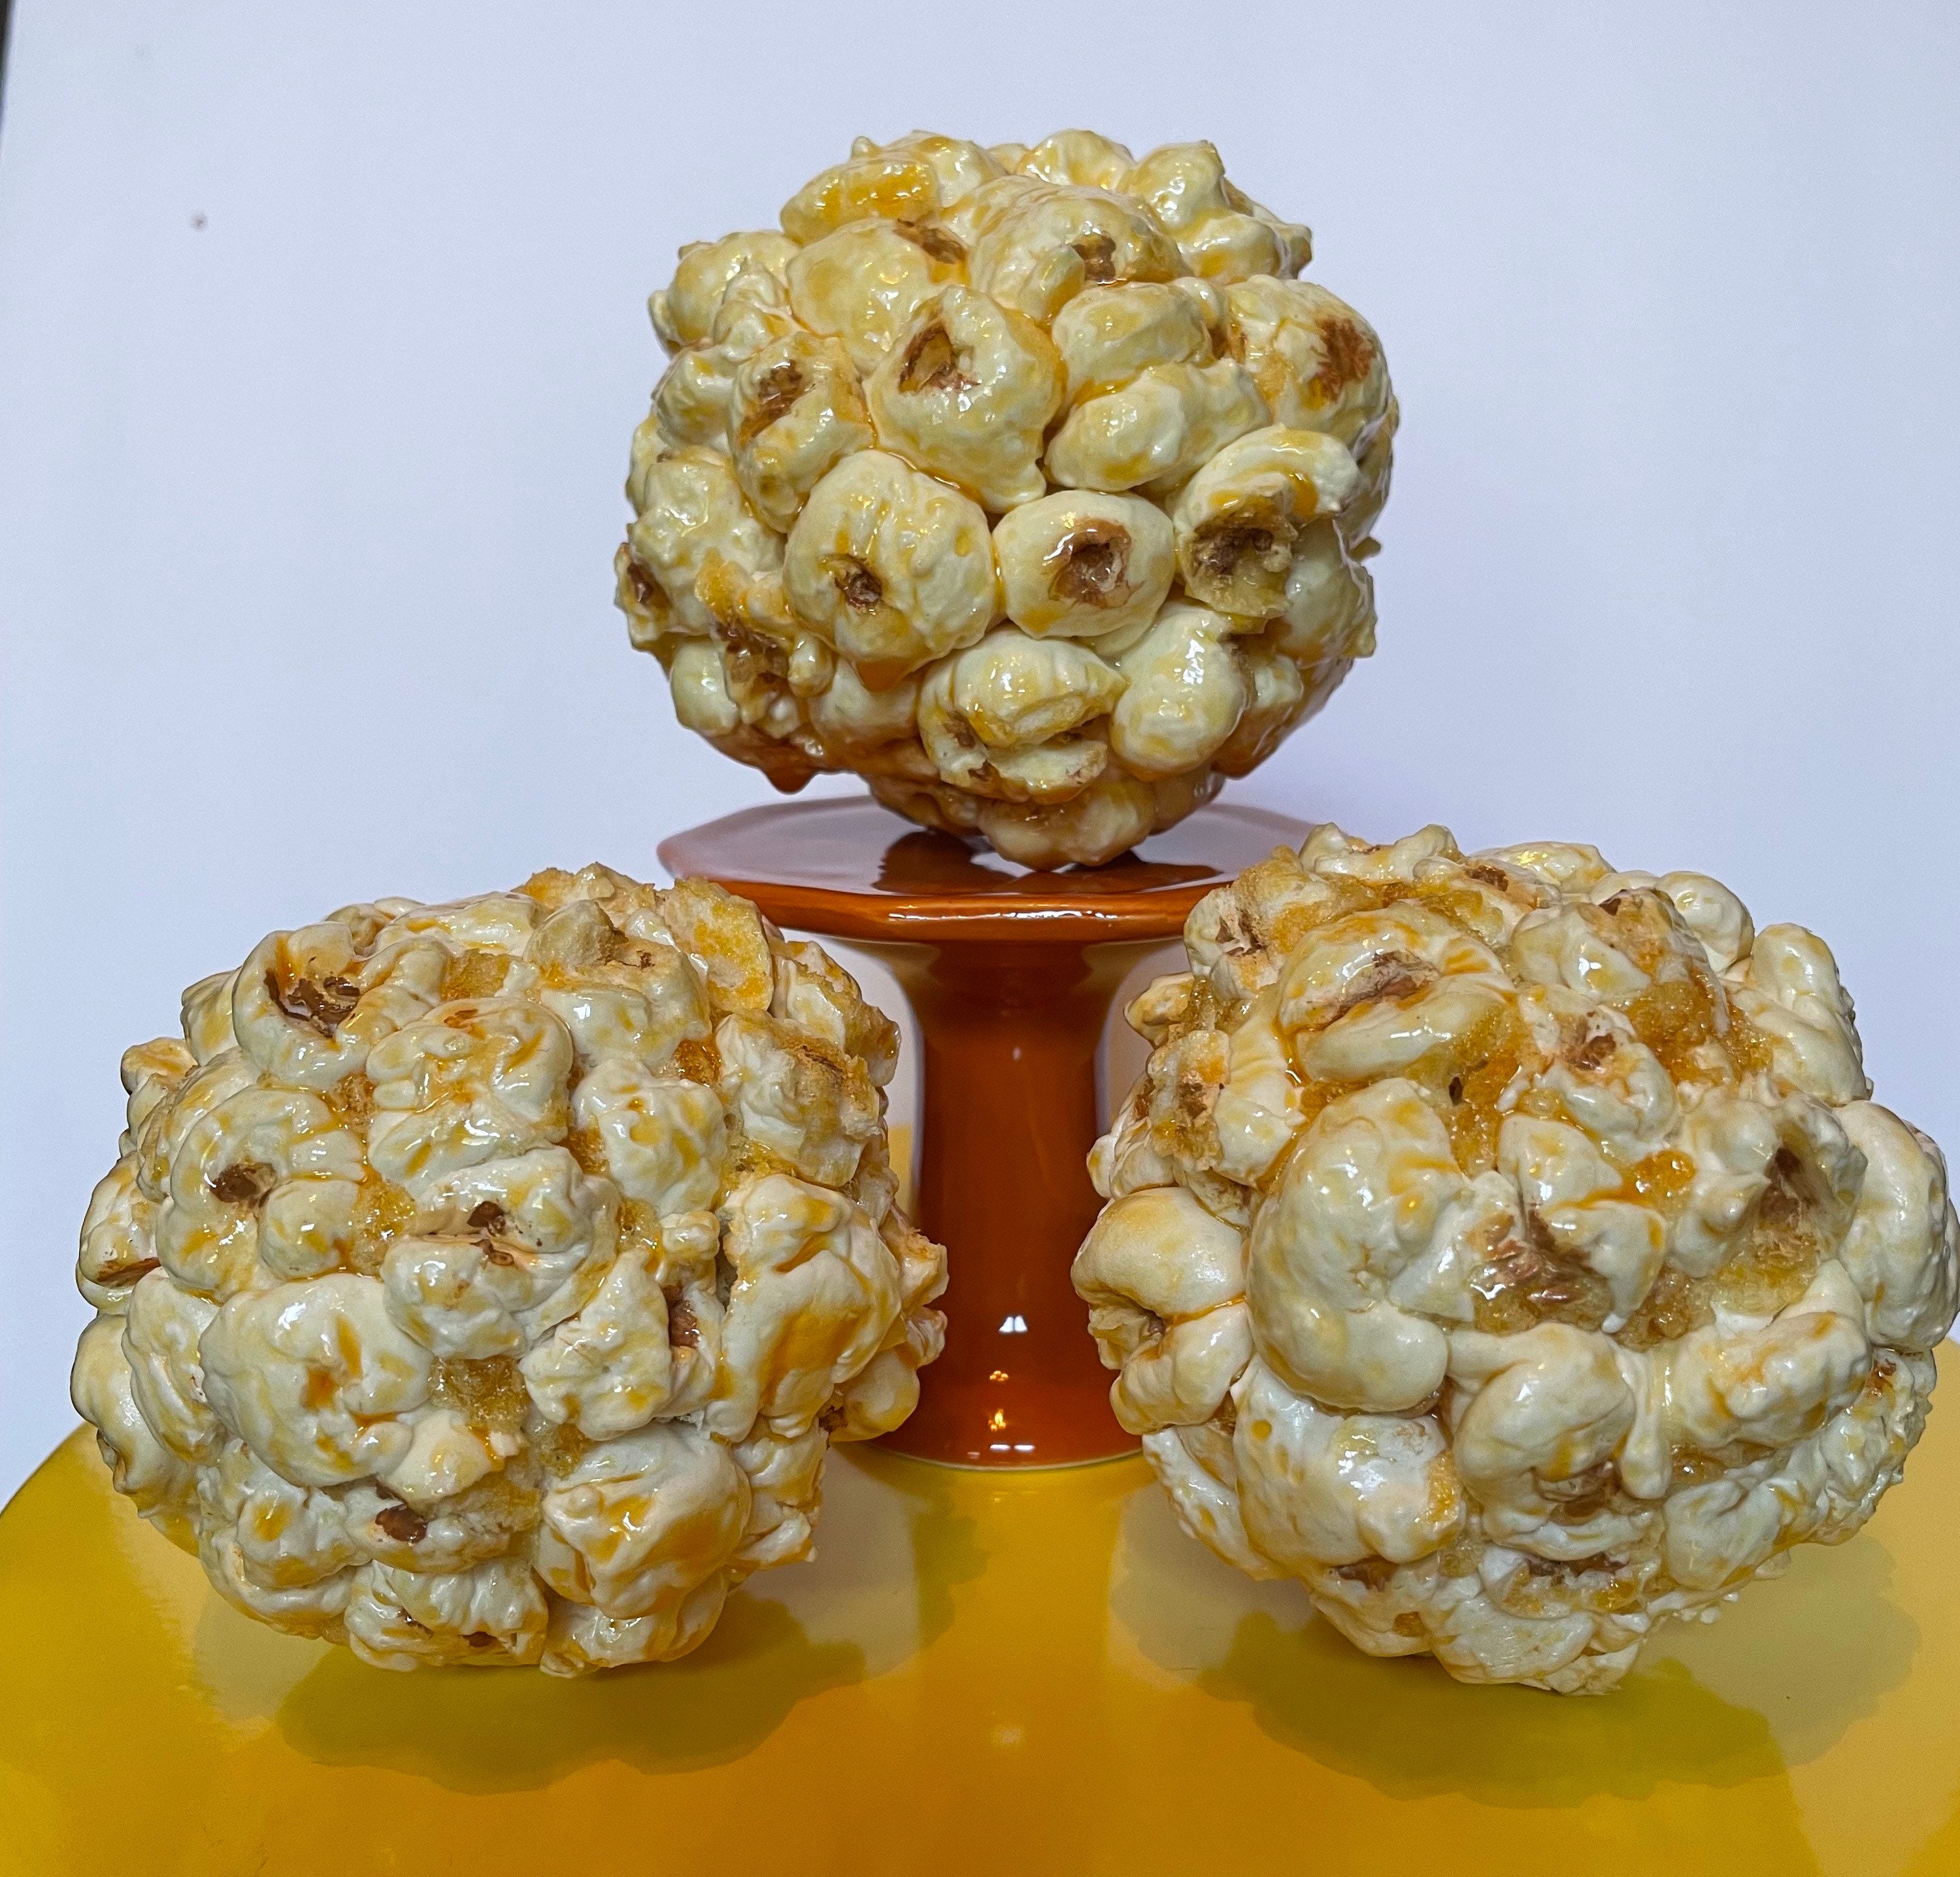 How to Make Popcorn Balls with a Popcorn Ball Maker from JustPoppin 